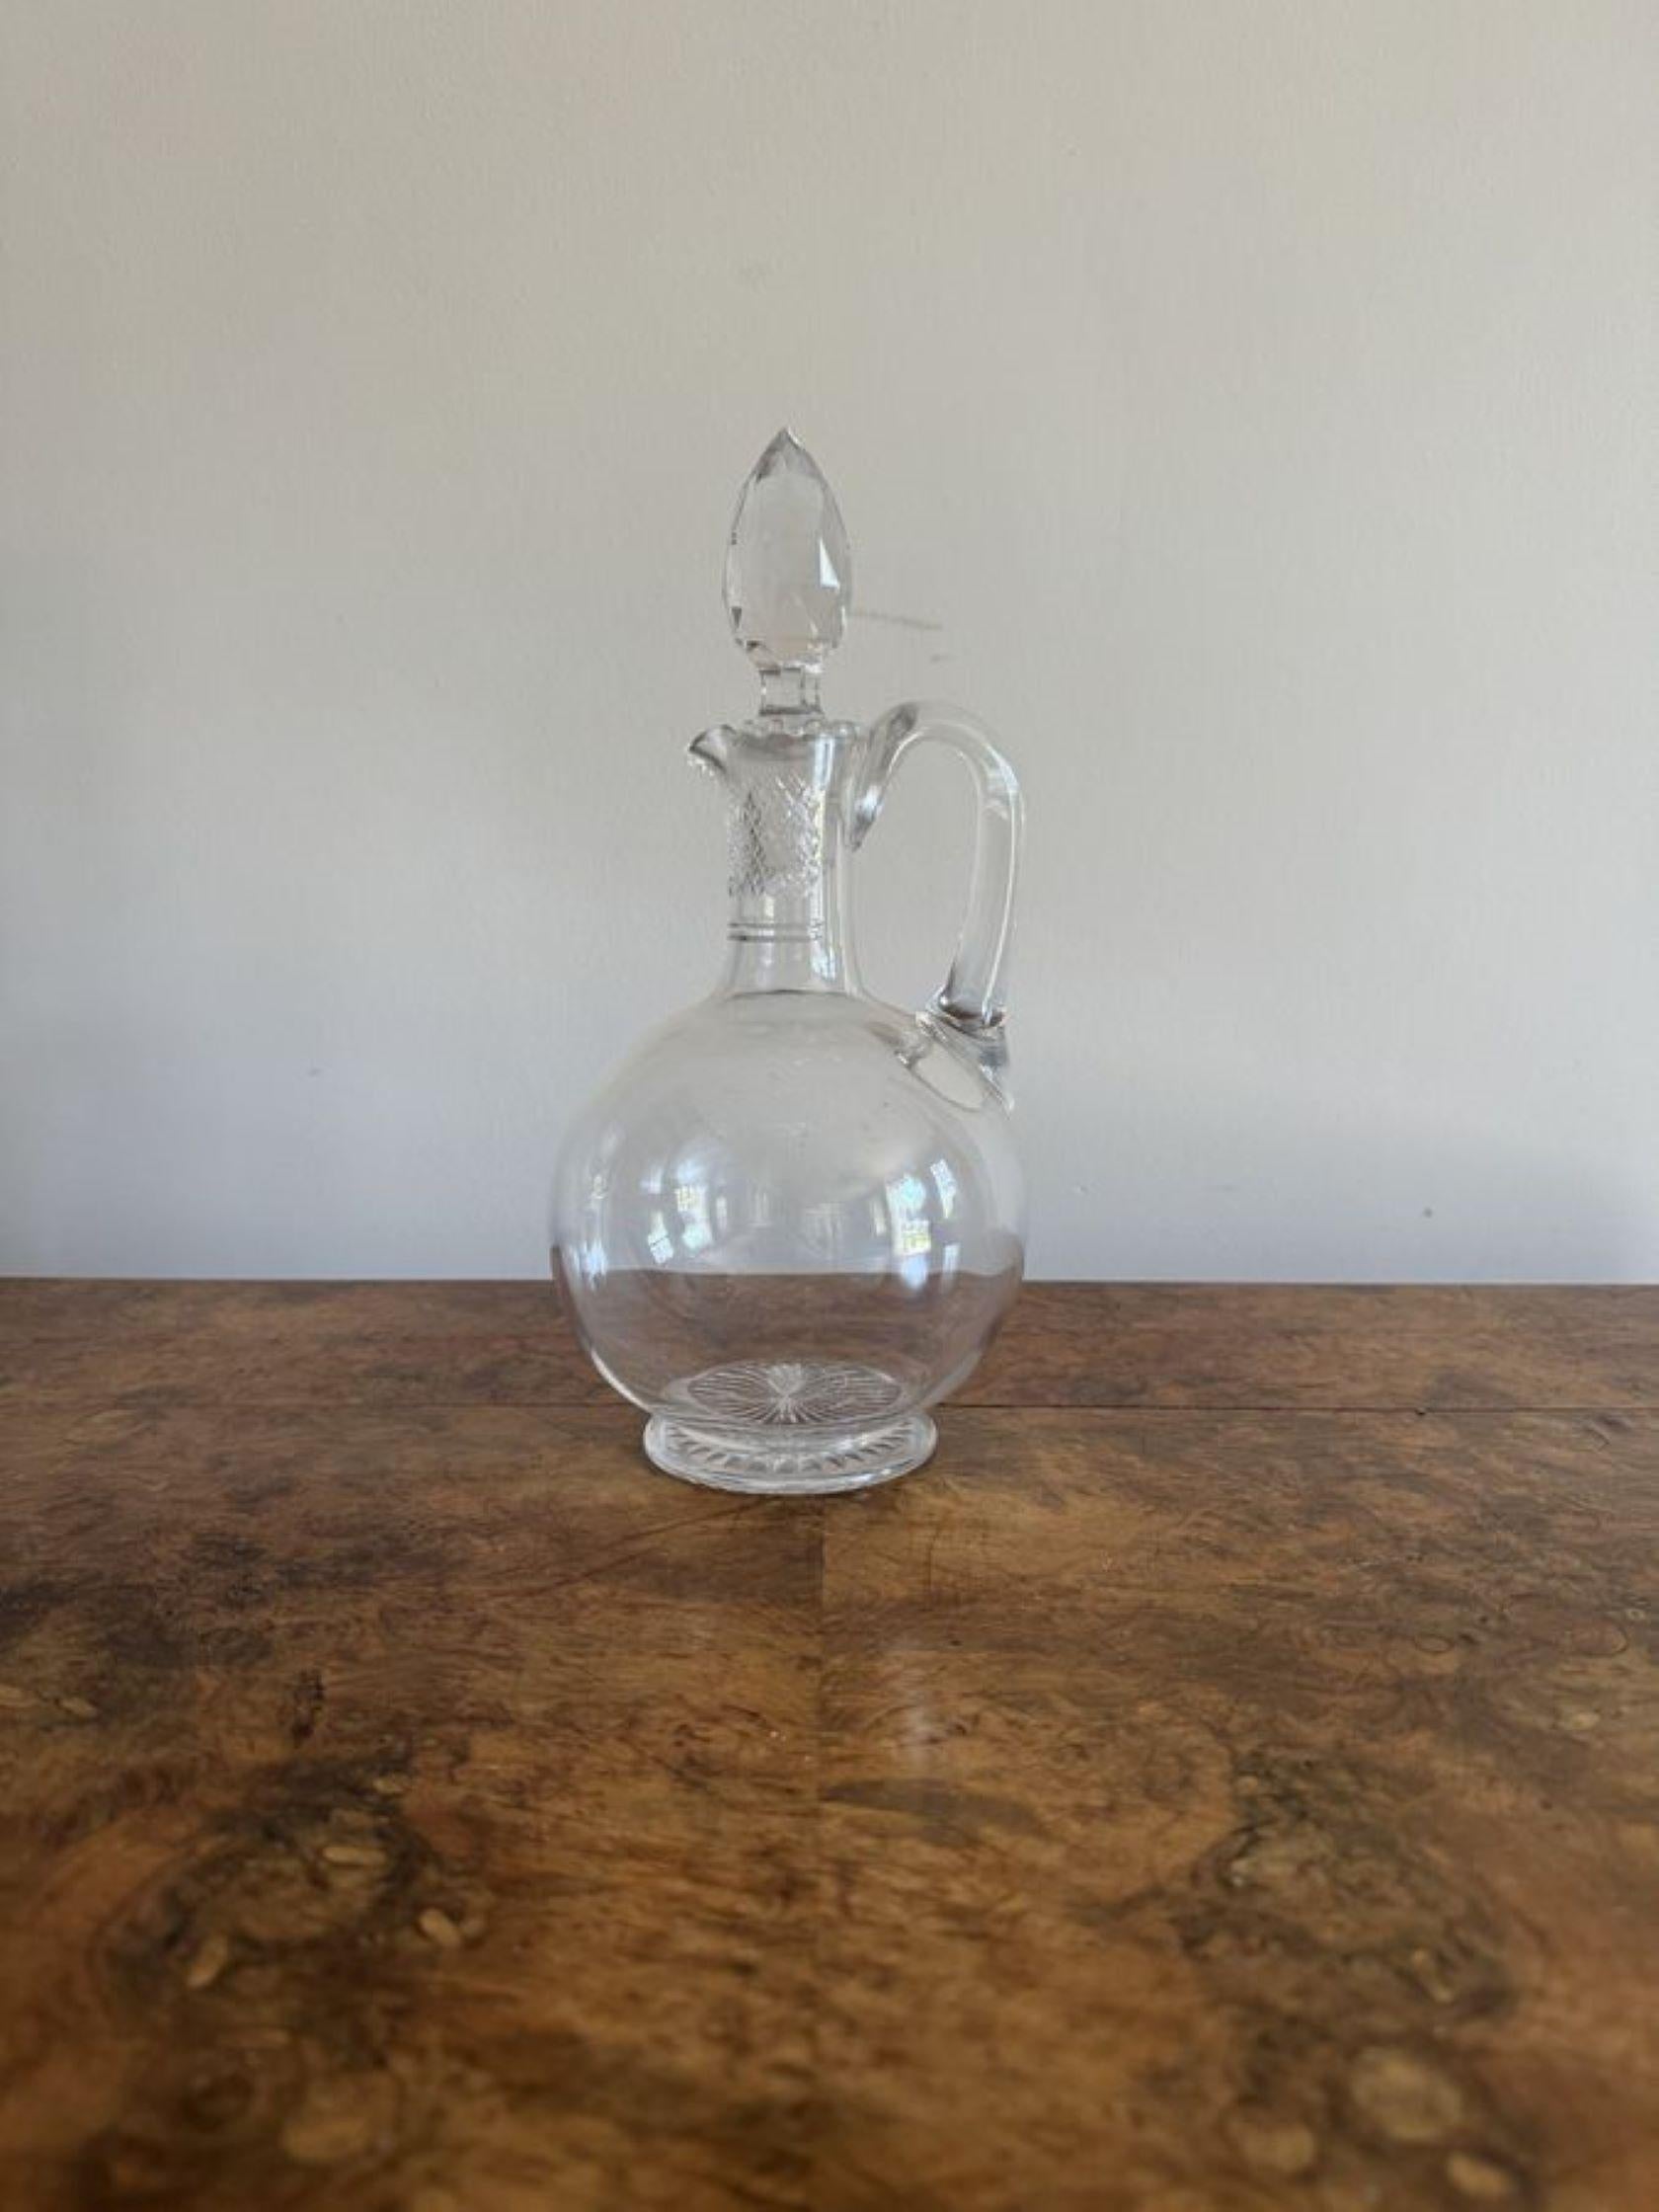 Quality antique Edwardian glass ewer, having a quality glass were with cut glass detail and the original cut glass stopper.

D. 1900